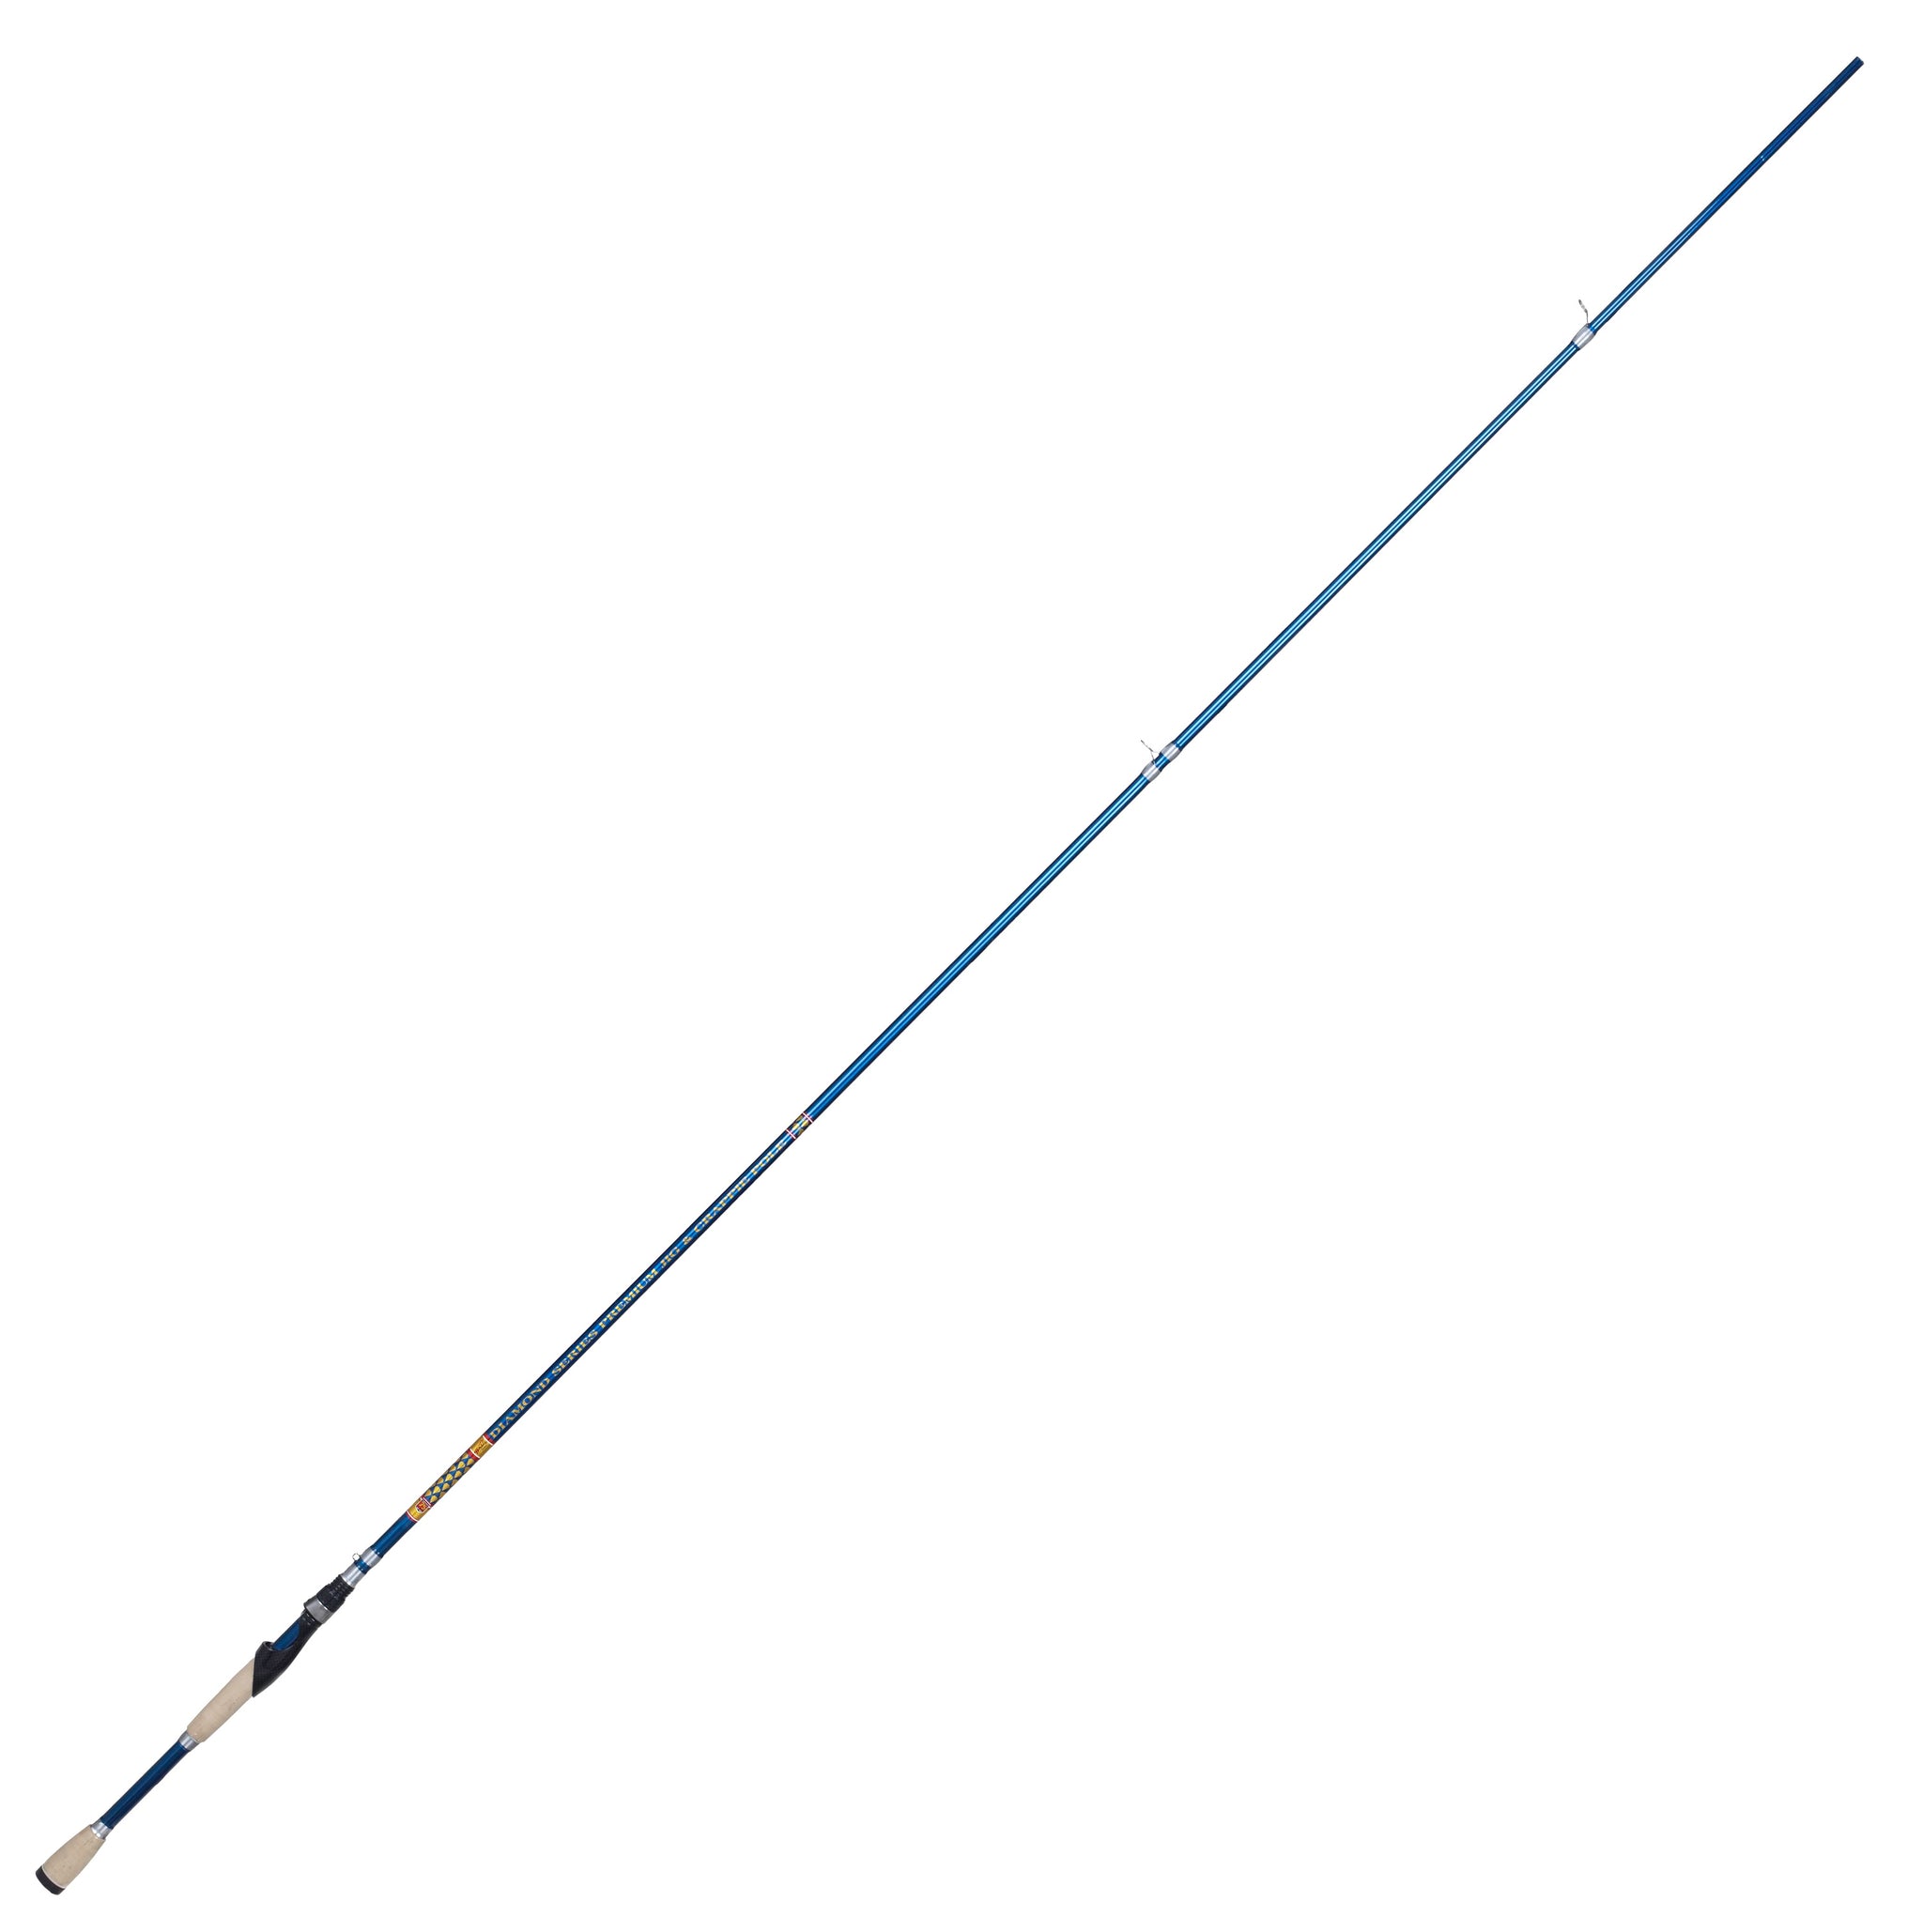  B&M Pole Co Jointed Cane Pole 14' 3pc #T143 : Fly Fishing Rods  : Sports & Outdoors